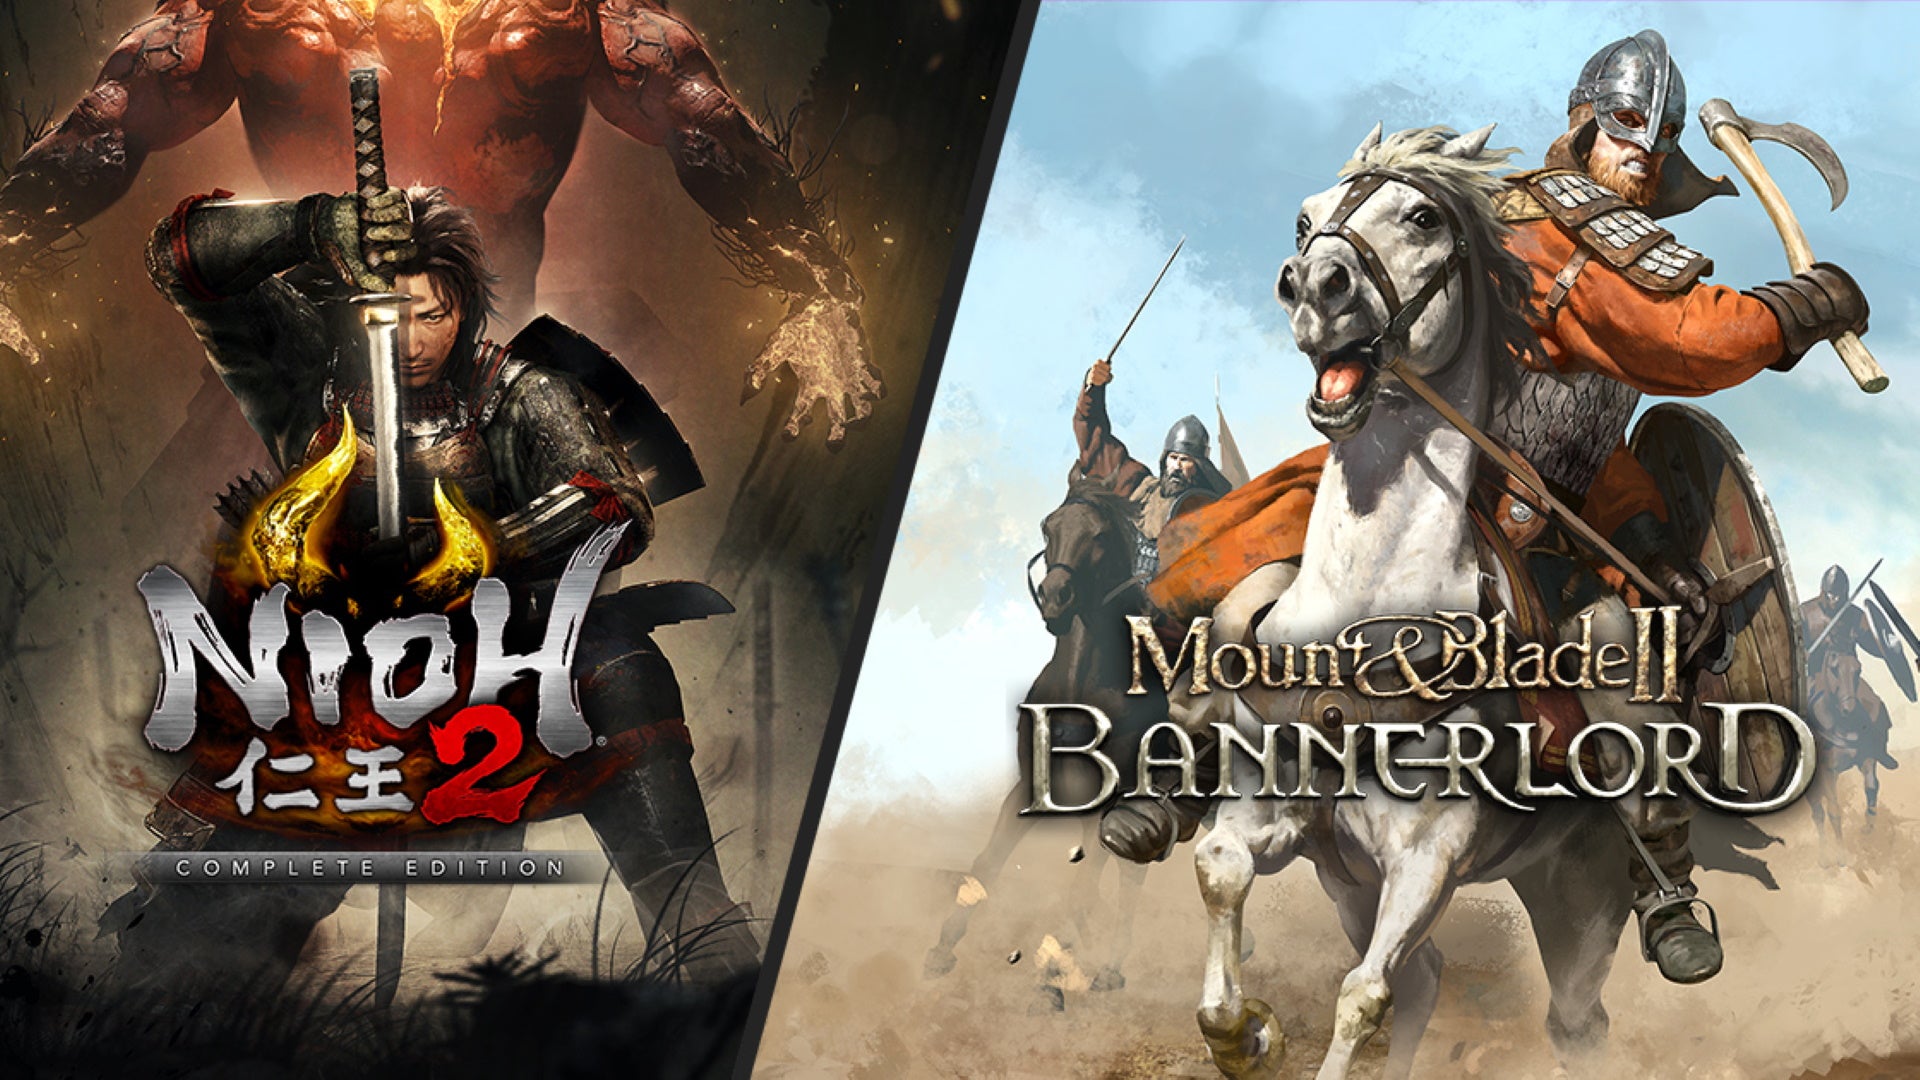 Artwork for Nioh 2 and Mount & Blade II: Bannerlord